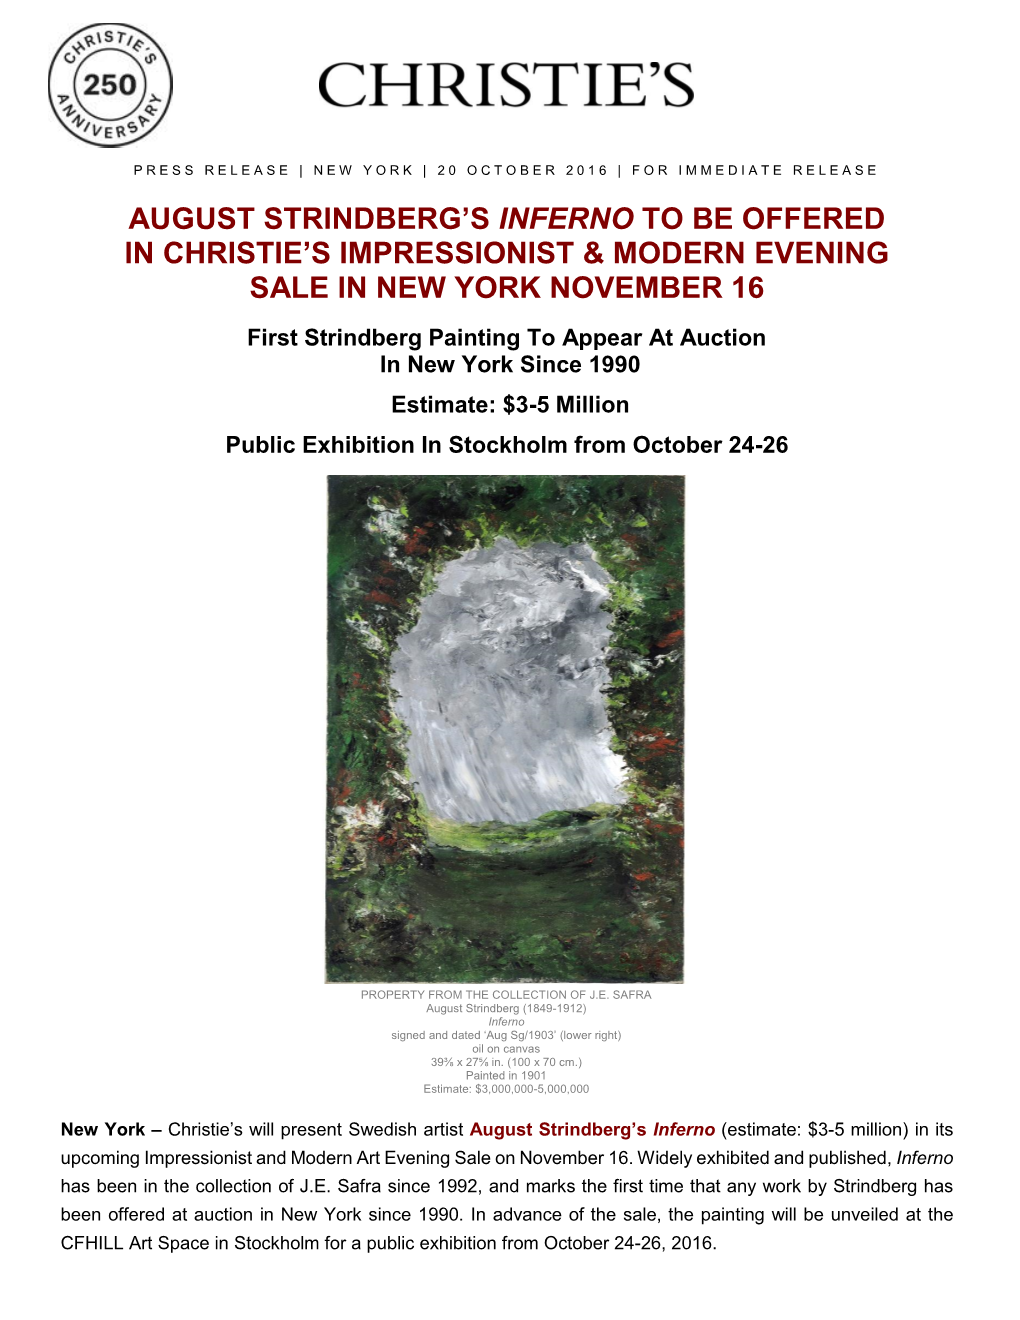 August Strindberg's Inferno to Be Offered in Christie's